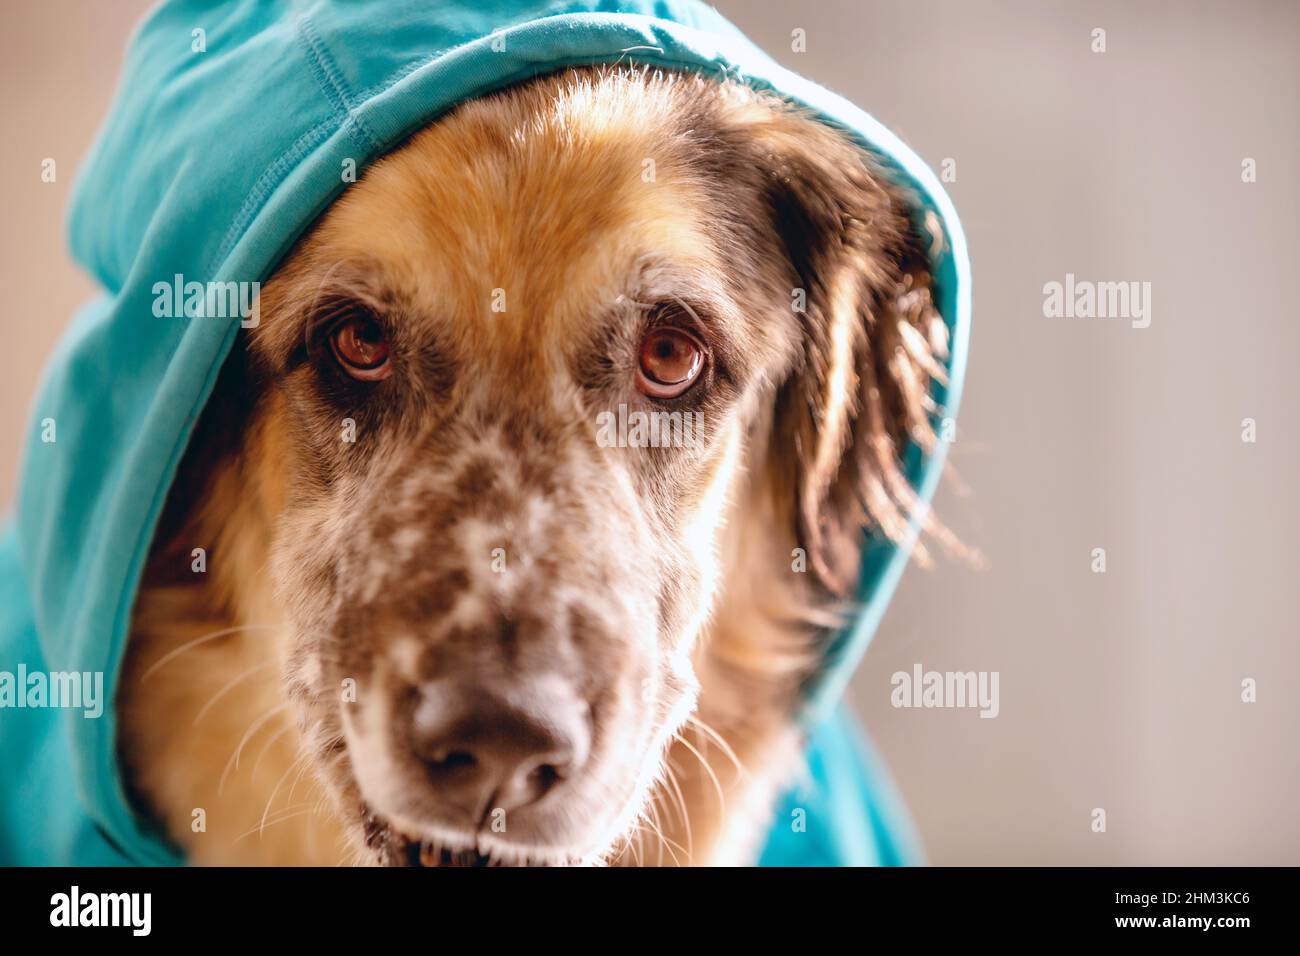 Funny big dog wearing bright blue hoodie sitting, face portrait, copy space Stock Photo